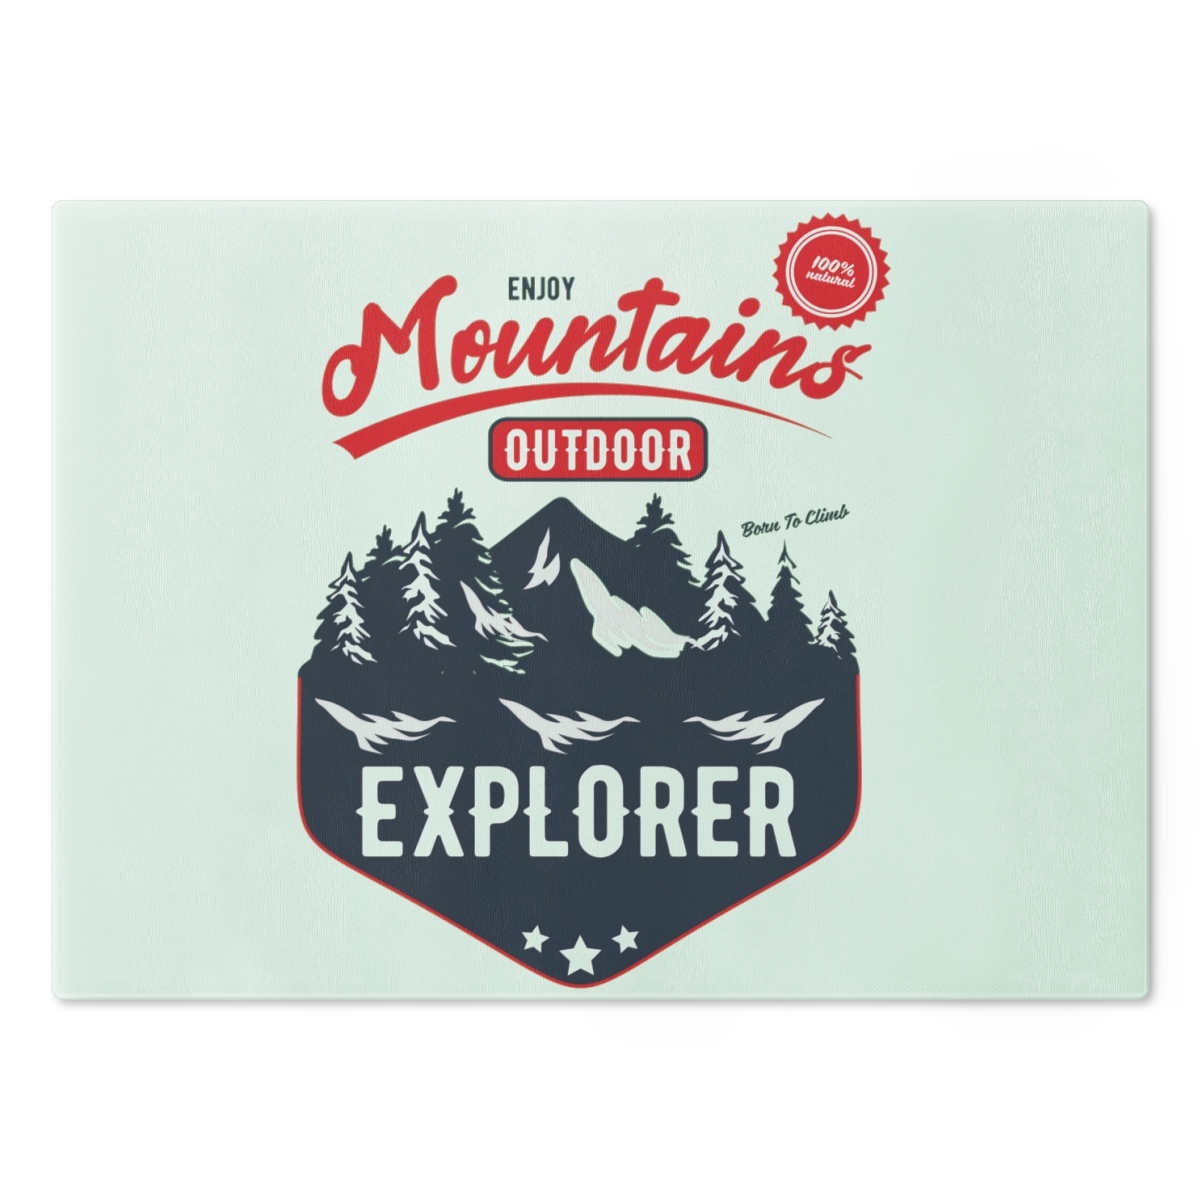 Personalized Glass Cutting Board - Mountains Outdoor Explorer - $49.44 - $62.83